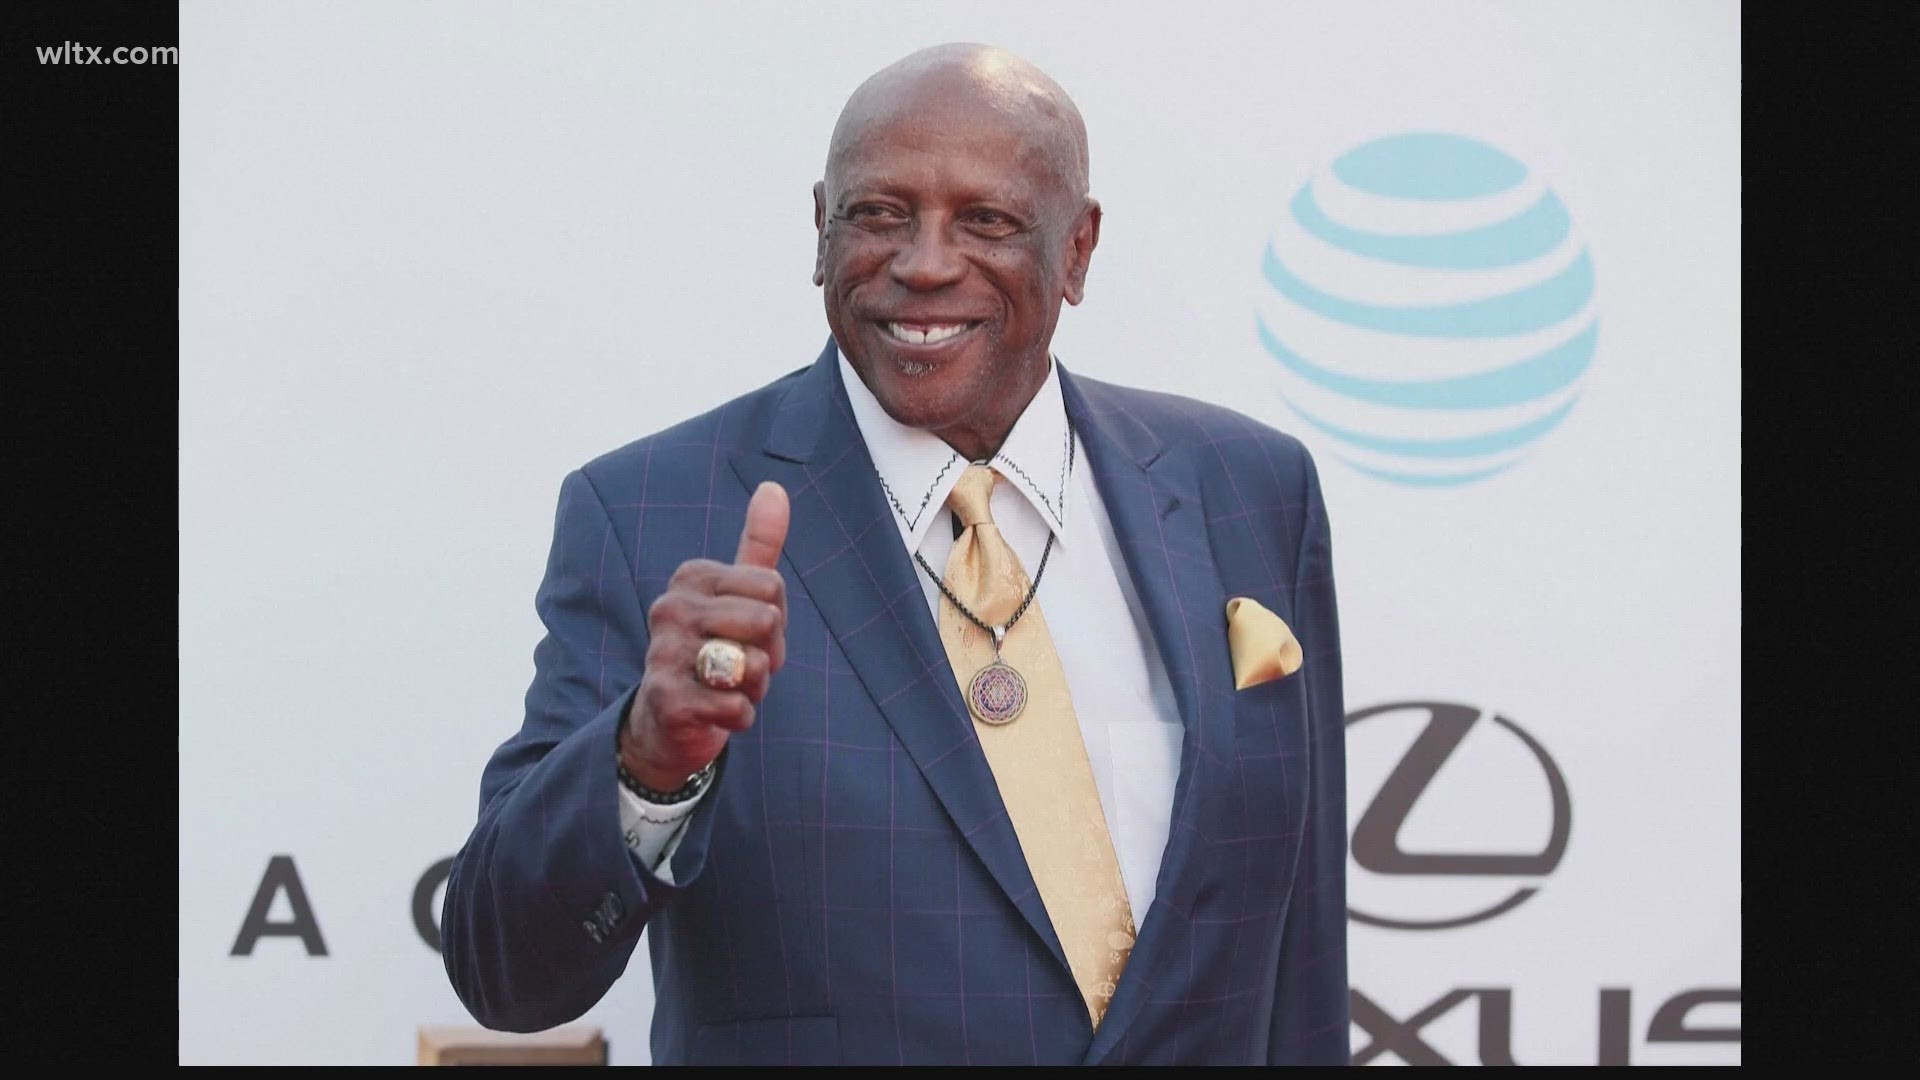 Louis Gossett Jr., the first Black man to win a supporting actor Oscar and an Emmy winner for his role in the seminal TV miniseries “Roots,” has died. He was 87.